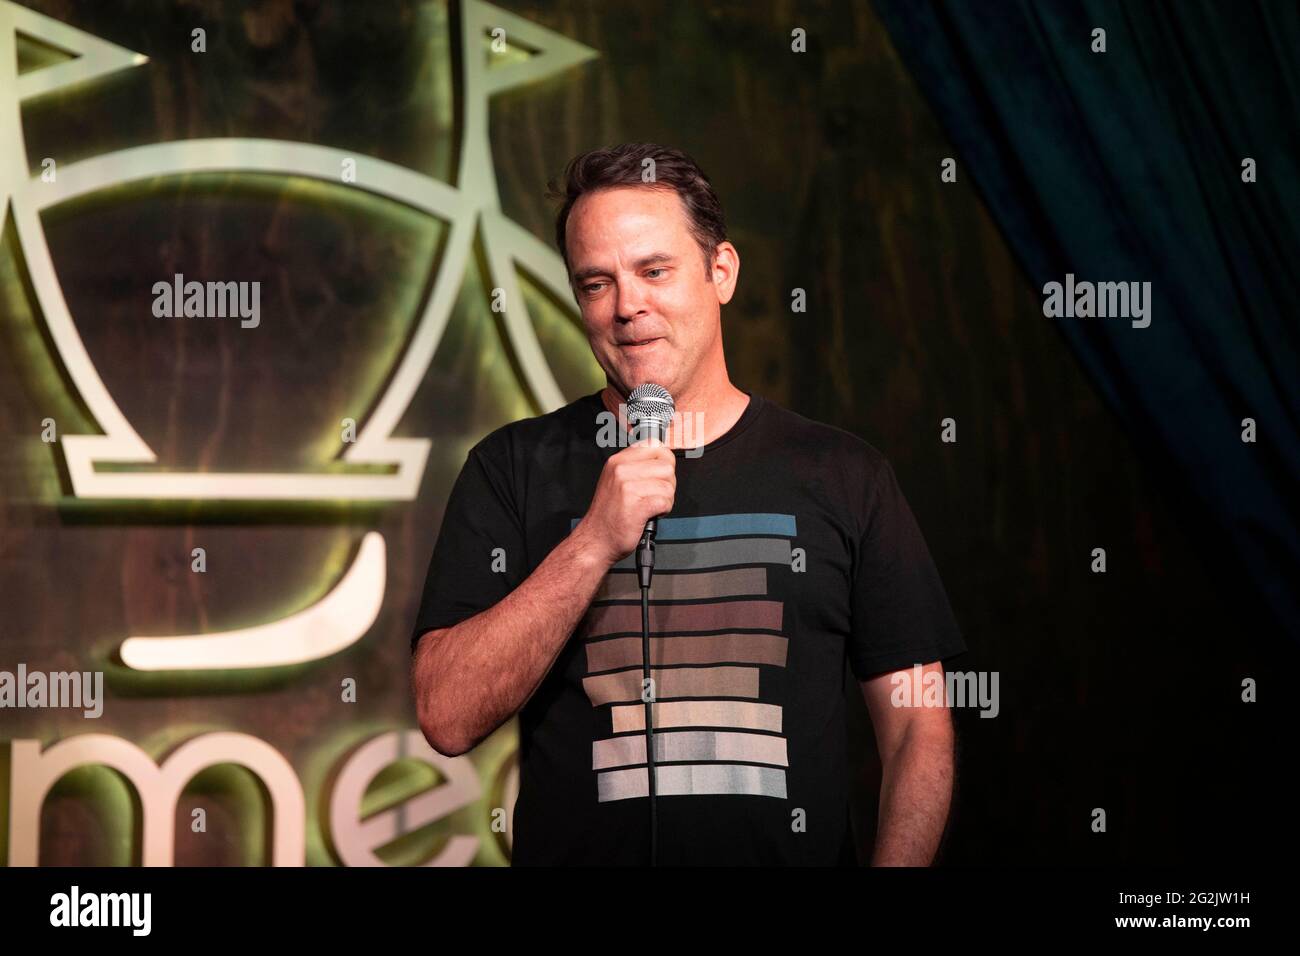 Los Angeles, USA. 11th June, 2021. Greg Baldwin performs at The Shindig Show debut at the Comedy Chateau, Los Angeles, CA on June 11, 2021 Credit: Eugene Powers/Alamy Live News Stock Photo